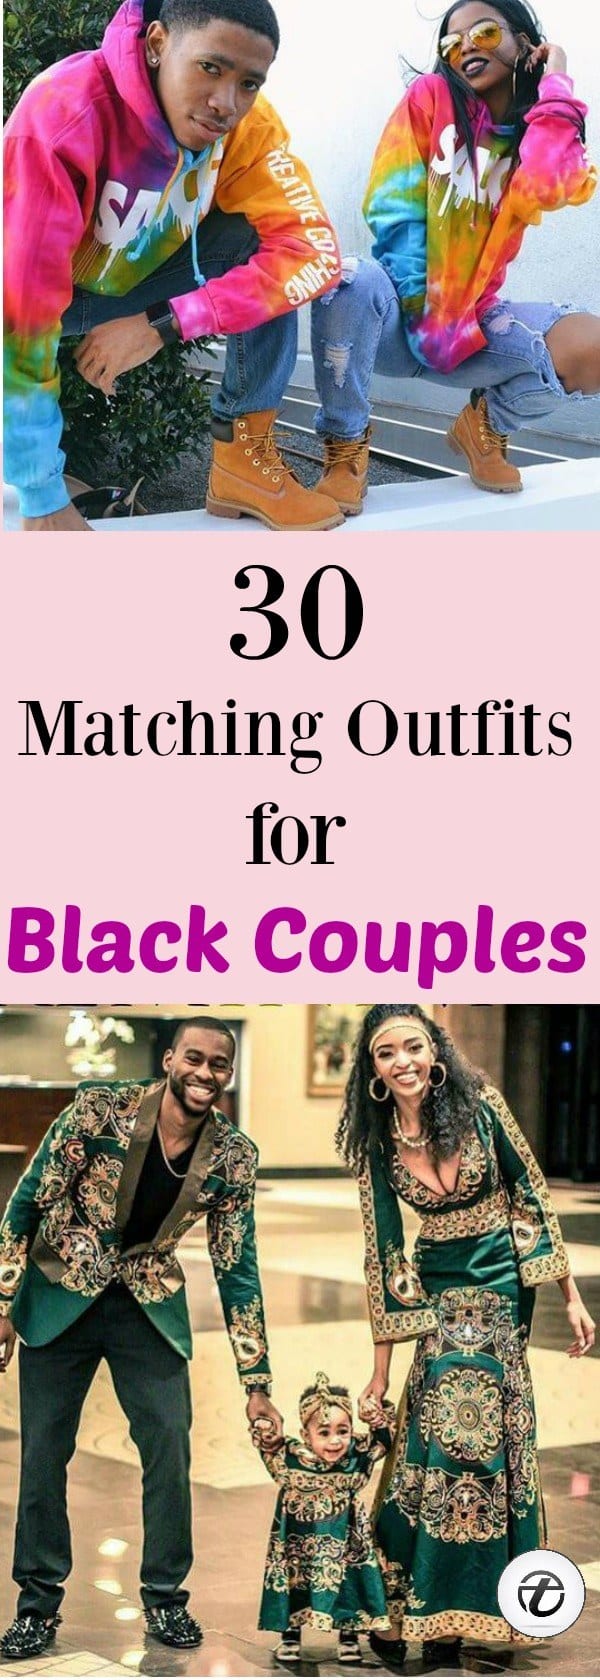 Matching Outfits for Black Couples (1)